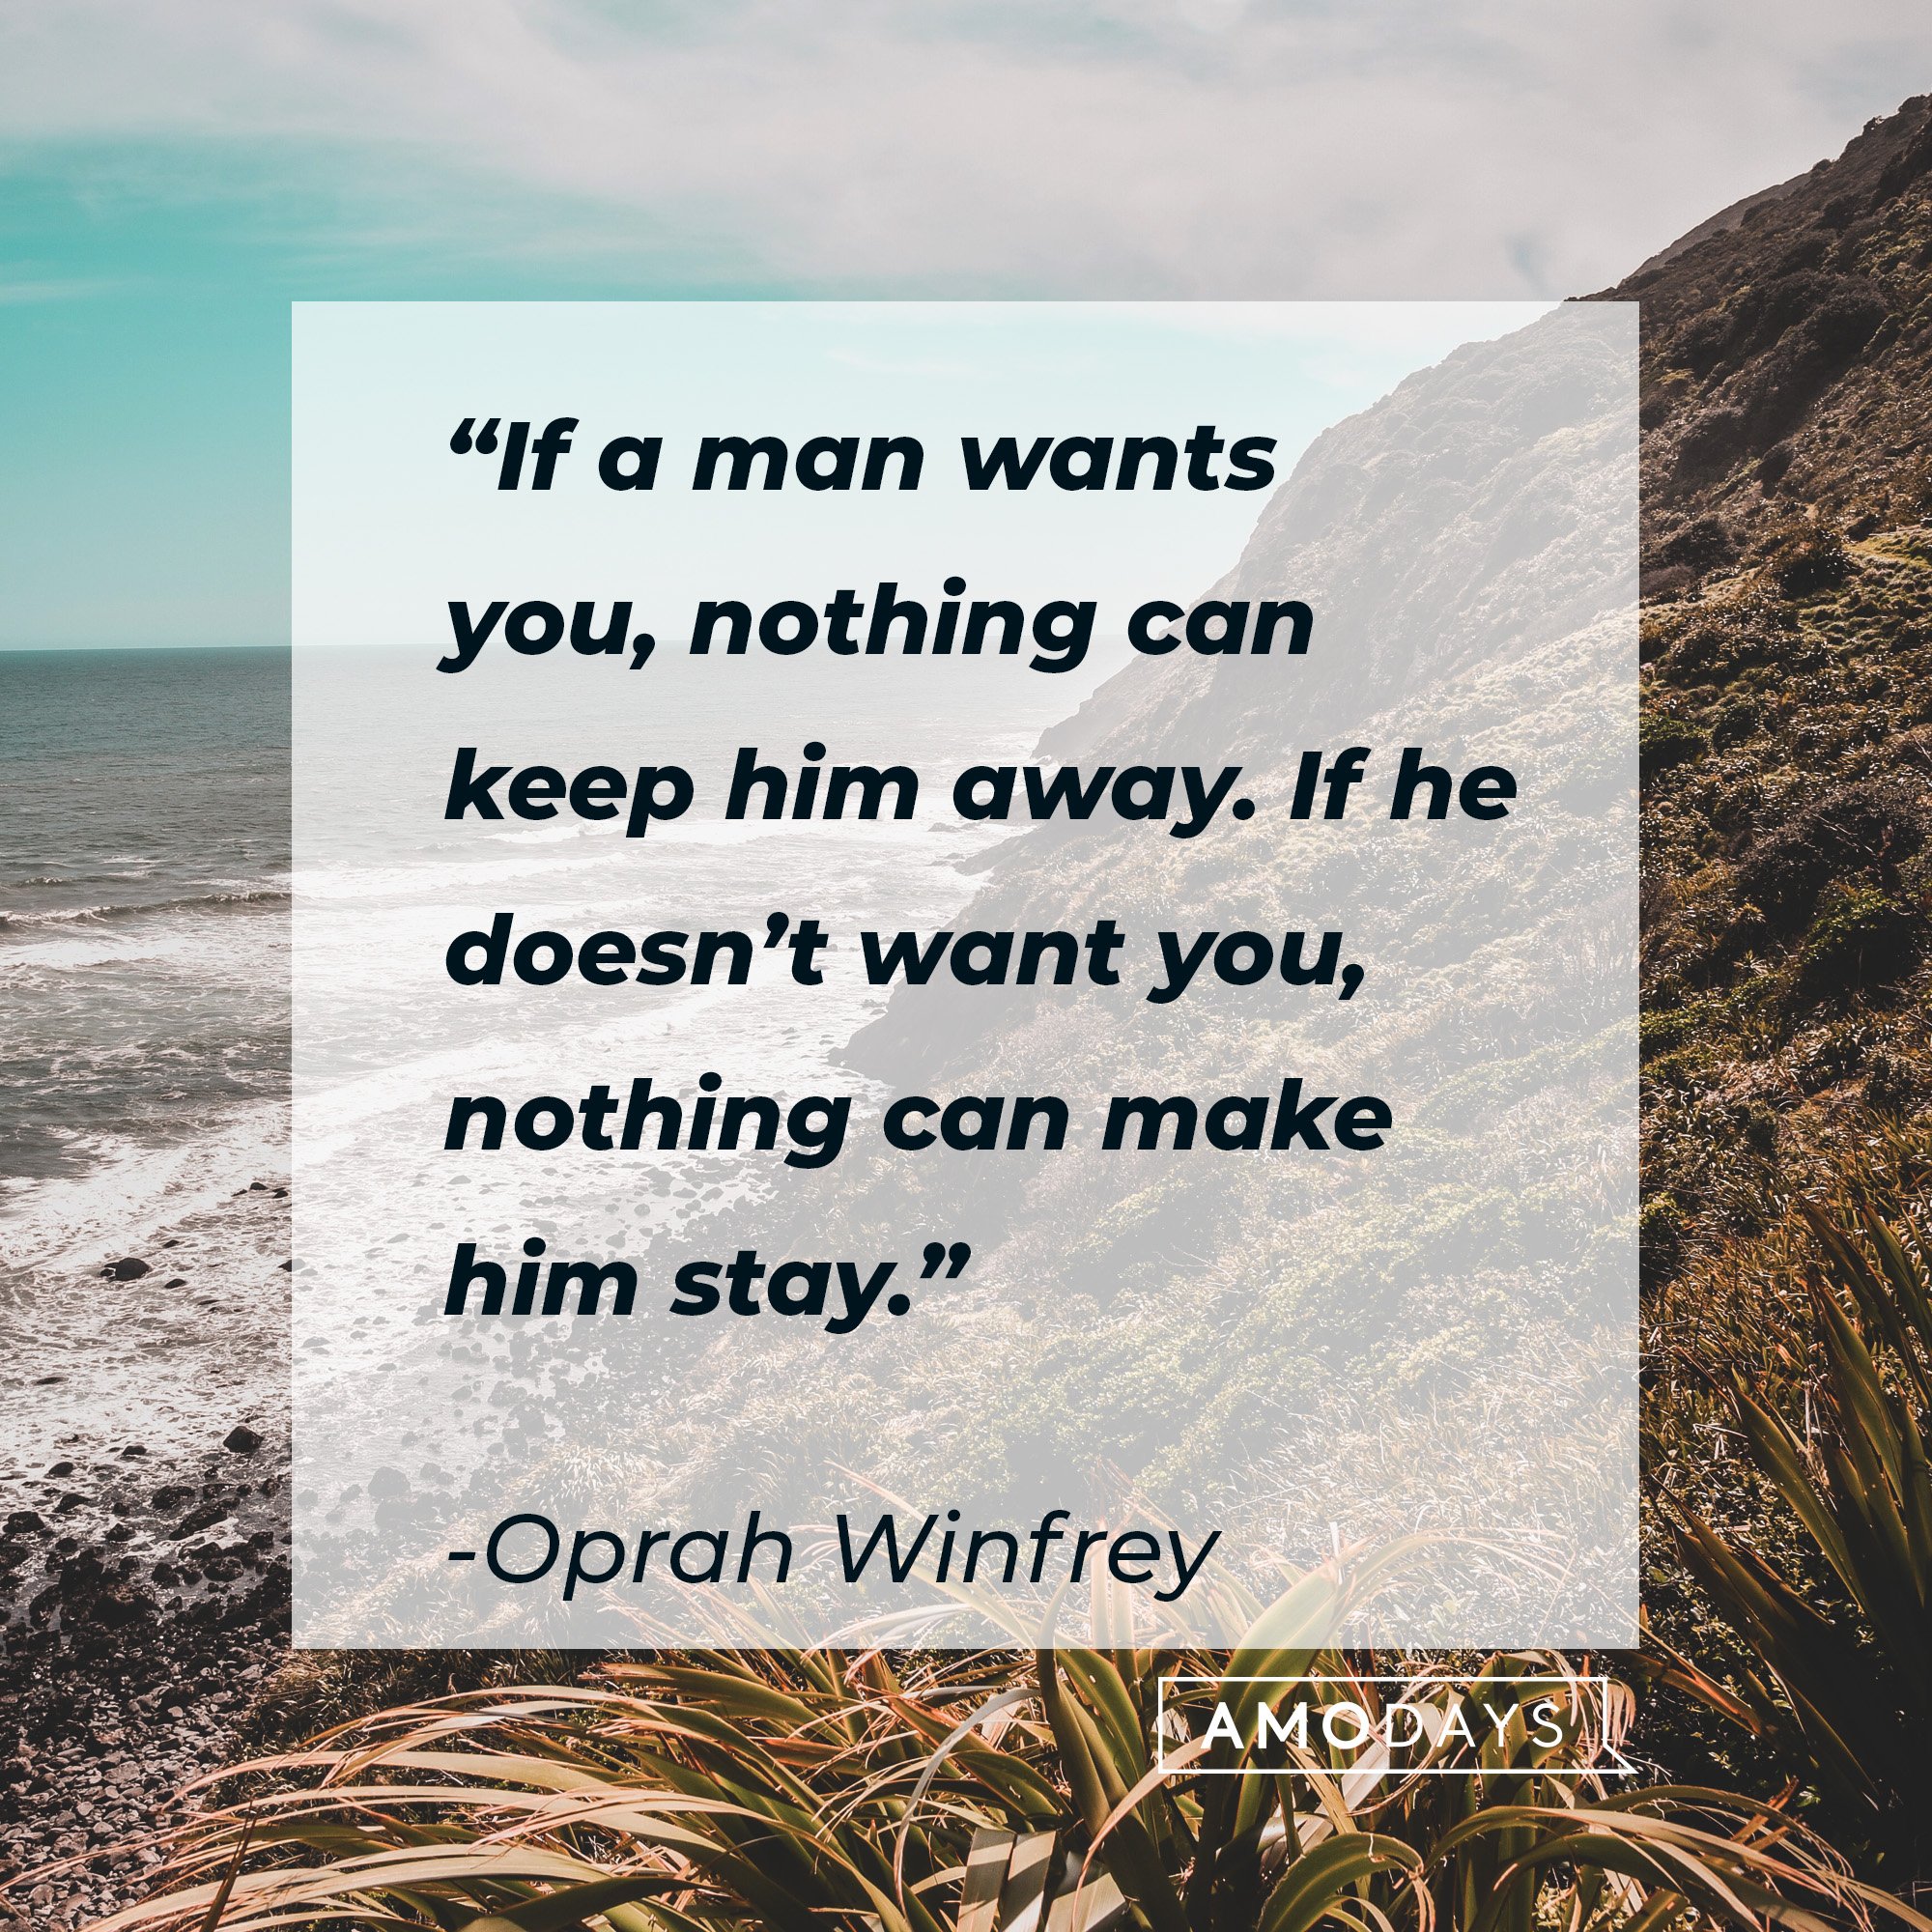 Oprah Winfrey's quote: “If a man wants you, nothing can keep him away. If he doesn’t want you, nothing can make him stay.” | Image: AmoDays